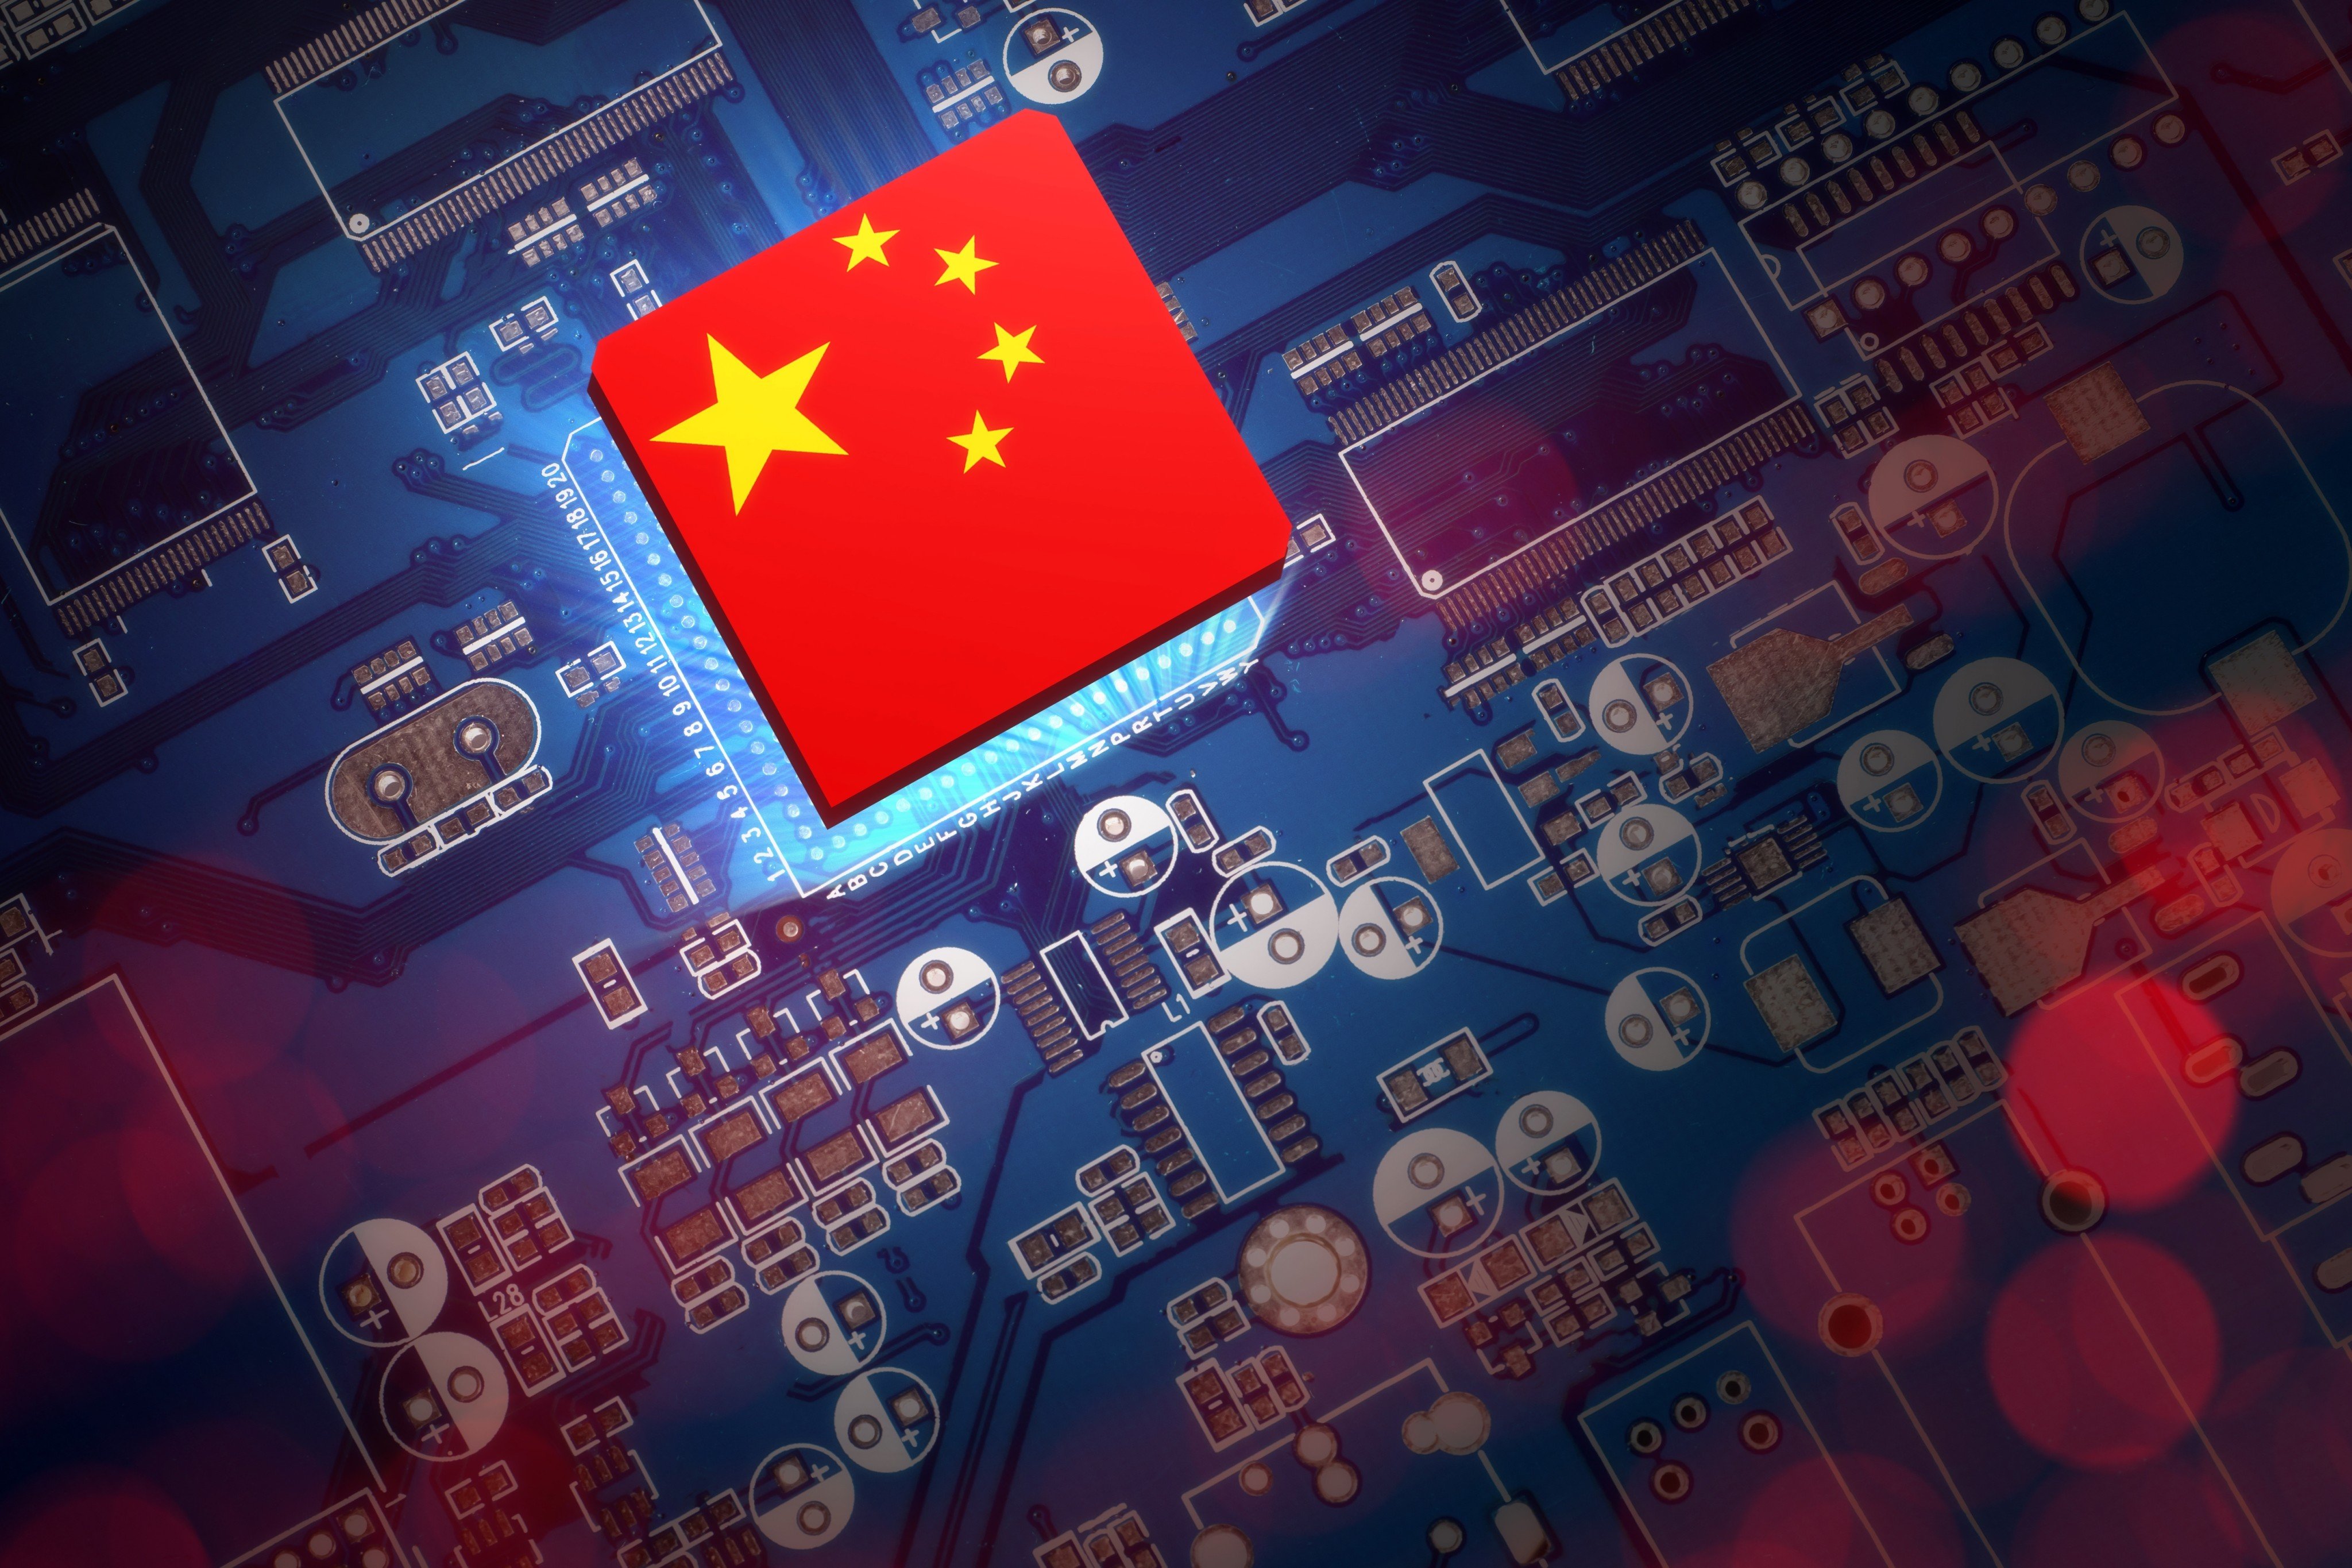 Should the Geekbench findings get confirmed, Powerleader’s Powerstar CPU would mark the latest scandal to tarnish China’s development of indigenous chips, following the infamous Hanxin case in 2006. Image: Shutterstock